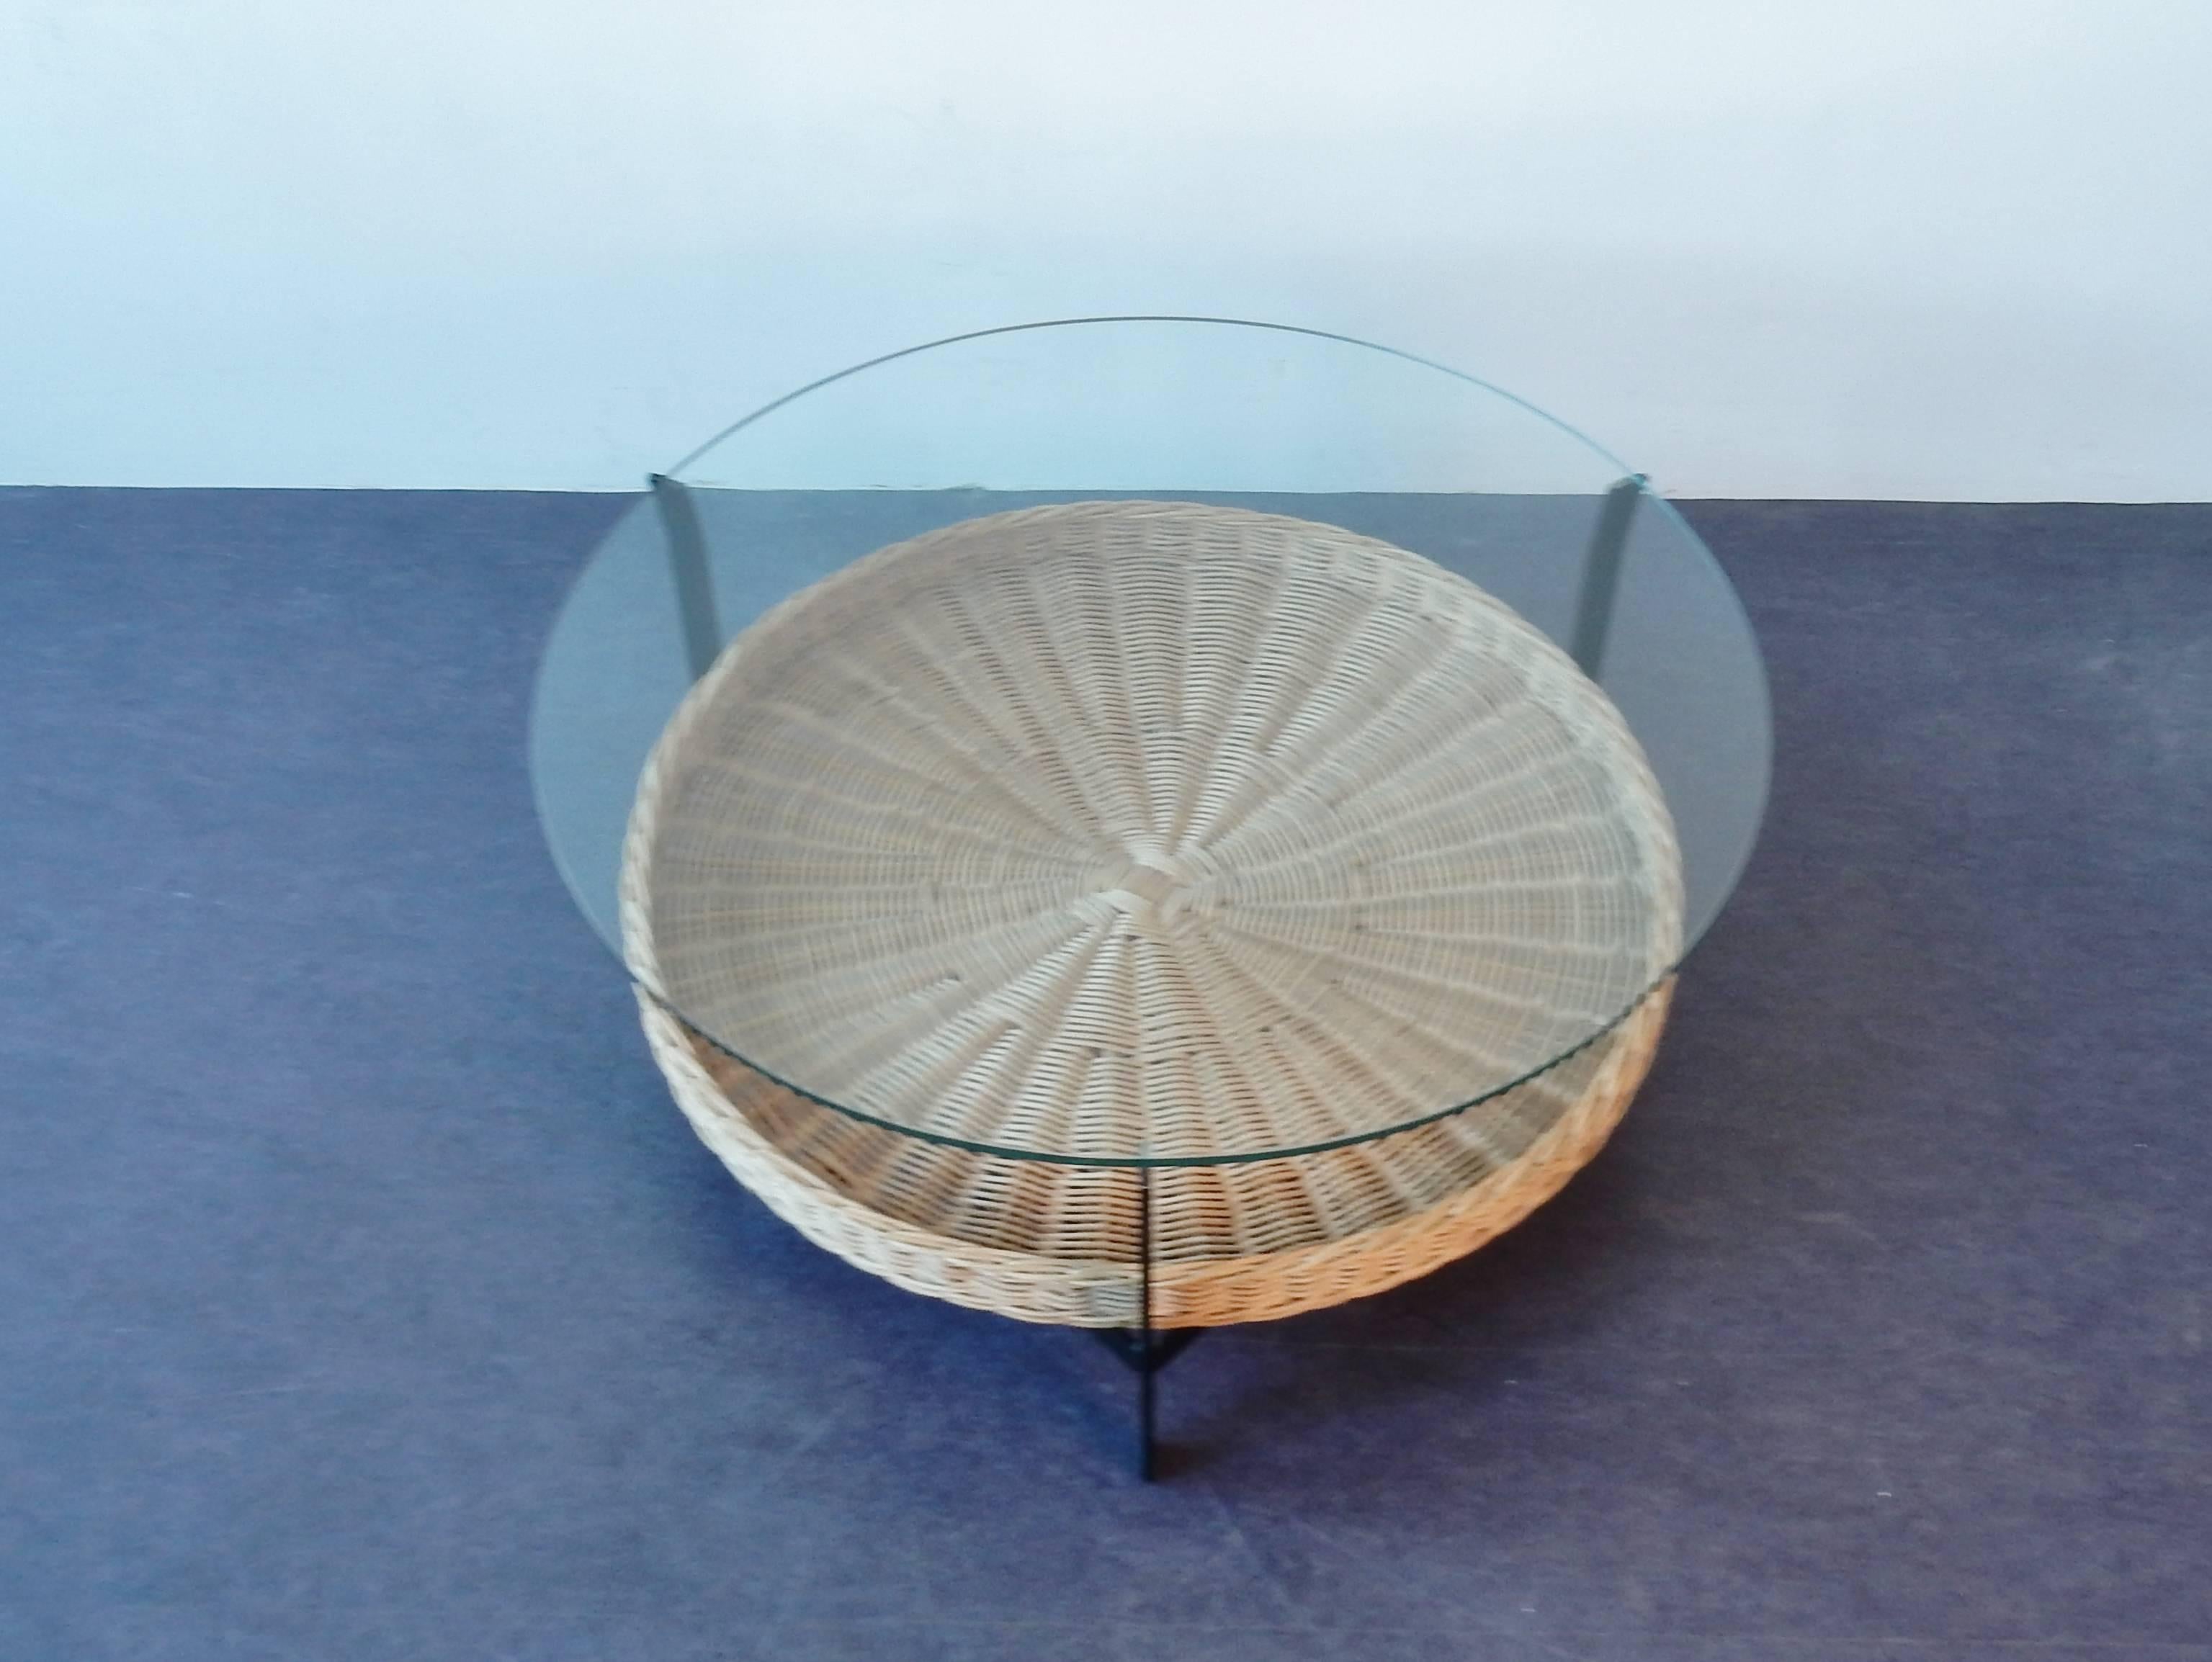 The design of this table does show similarities to the designs and productions of Janni Van Pelt, Martin Visser or Rohé. A table of Dutch origin in a very good condition. Some light scratches to the glass top from use. The glass has two little spots